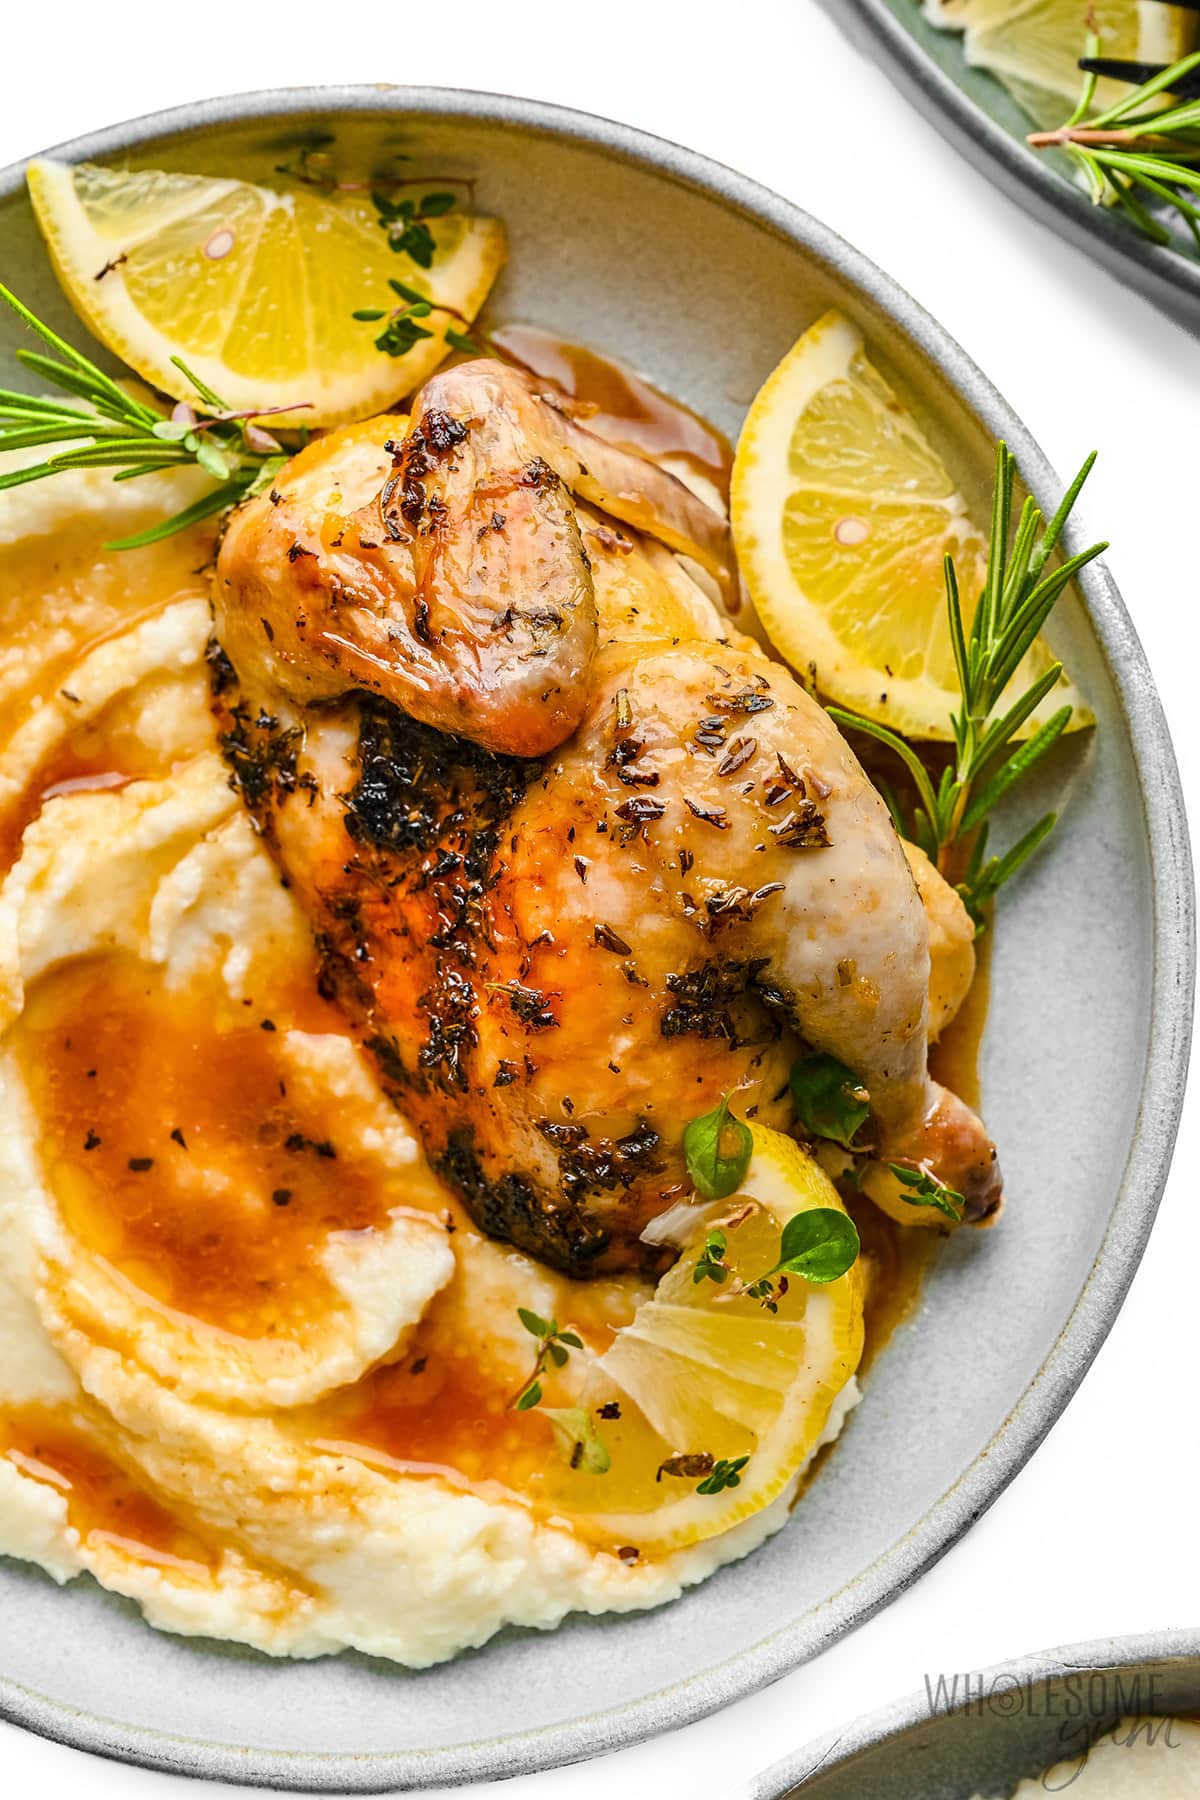 Cornish hen recipe served on a plate with mashed cauliflower.